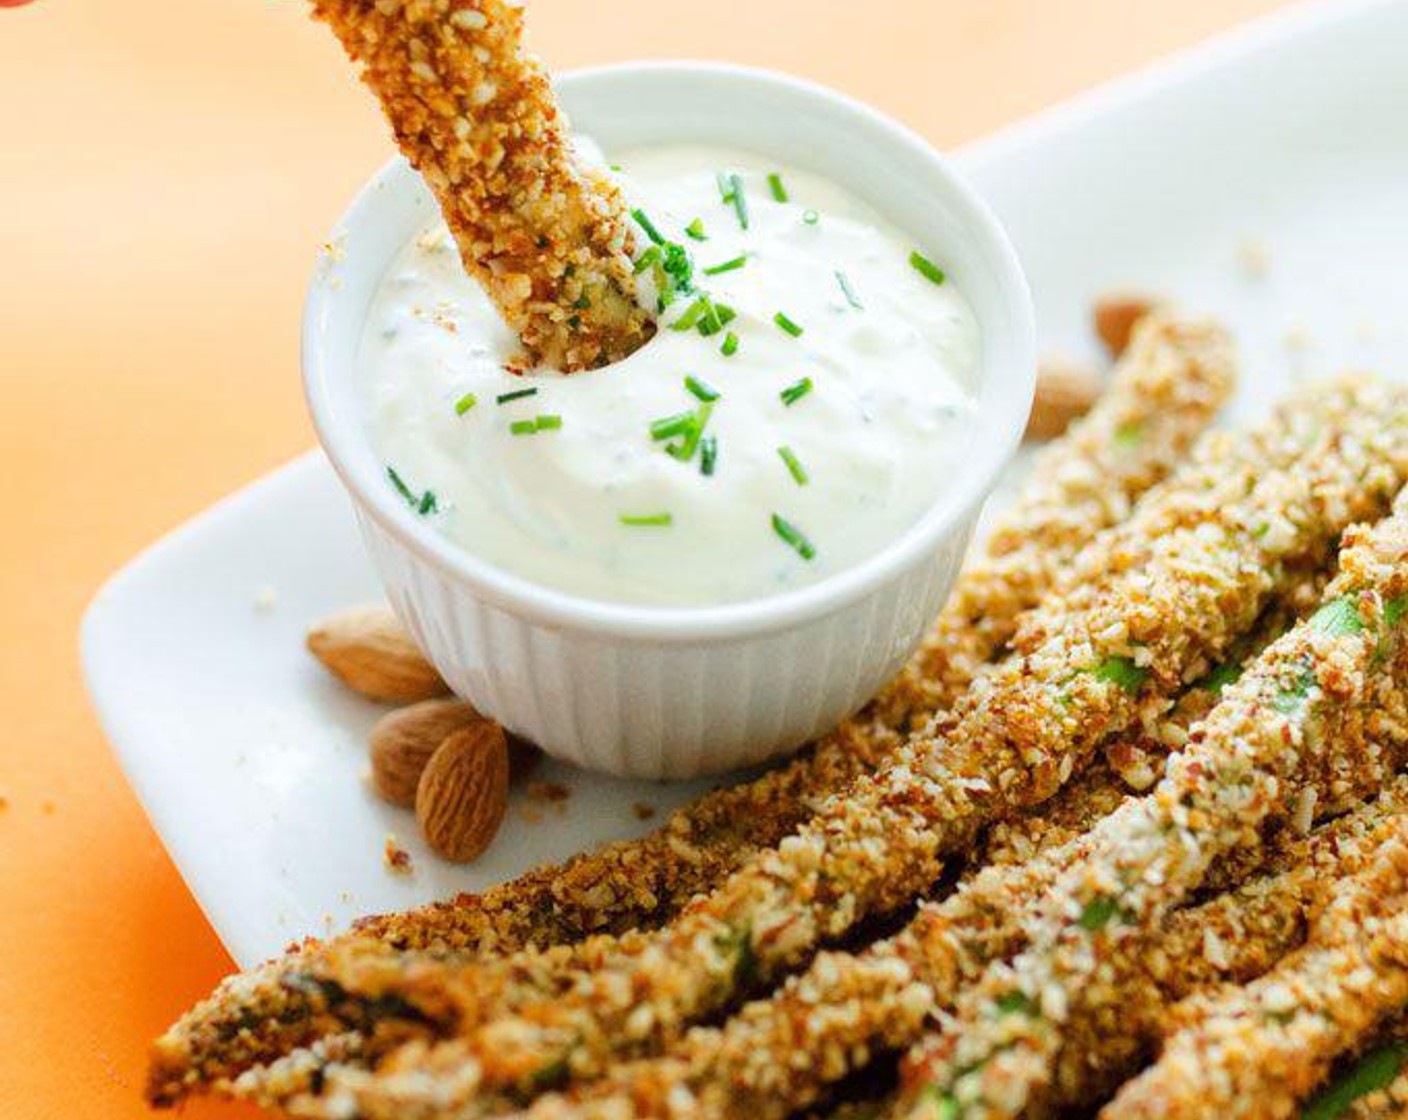 Parmesan and Almond Baked Asparagus Fries